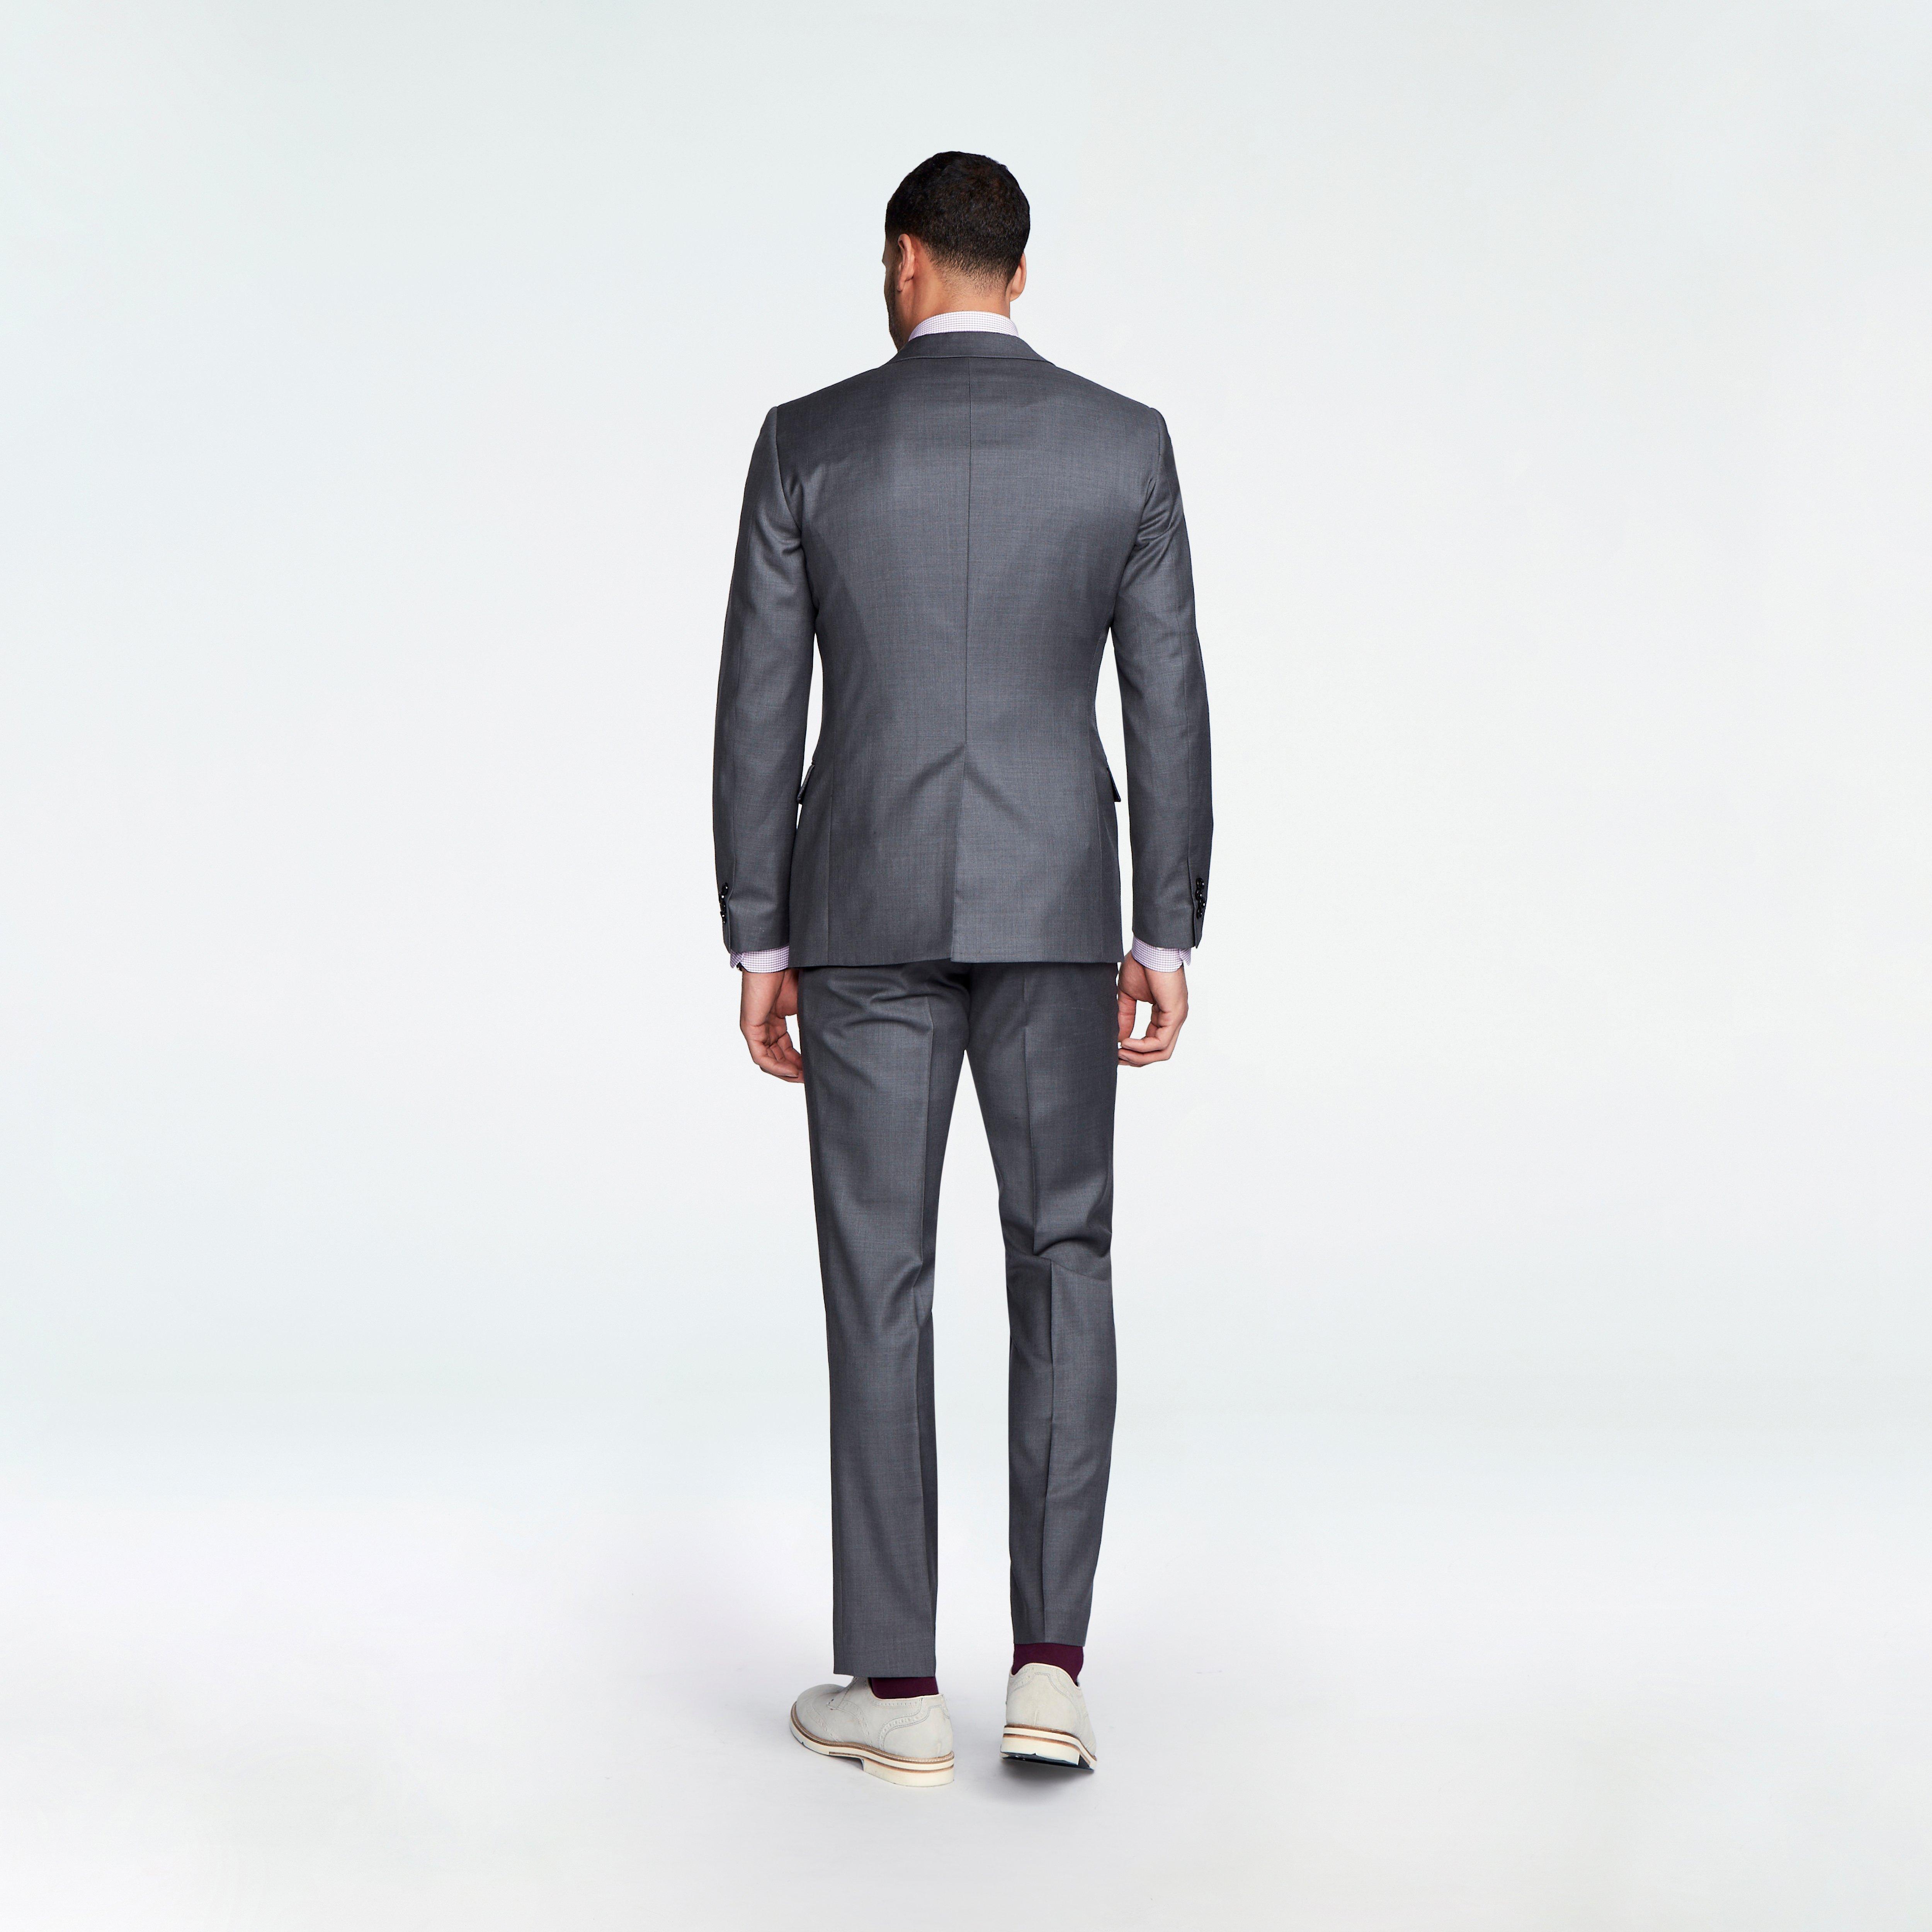 Custom Suits Made For You - Hemsworth Gray Suit | INDOCHINO